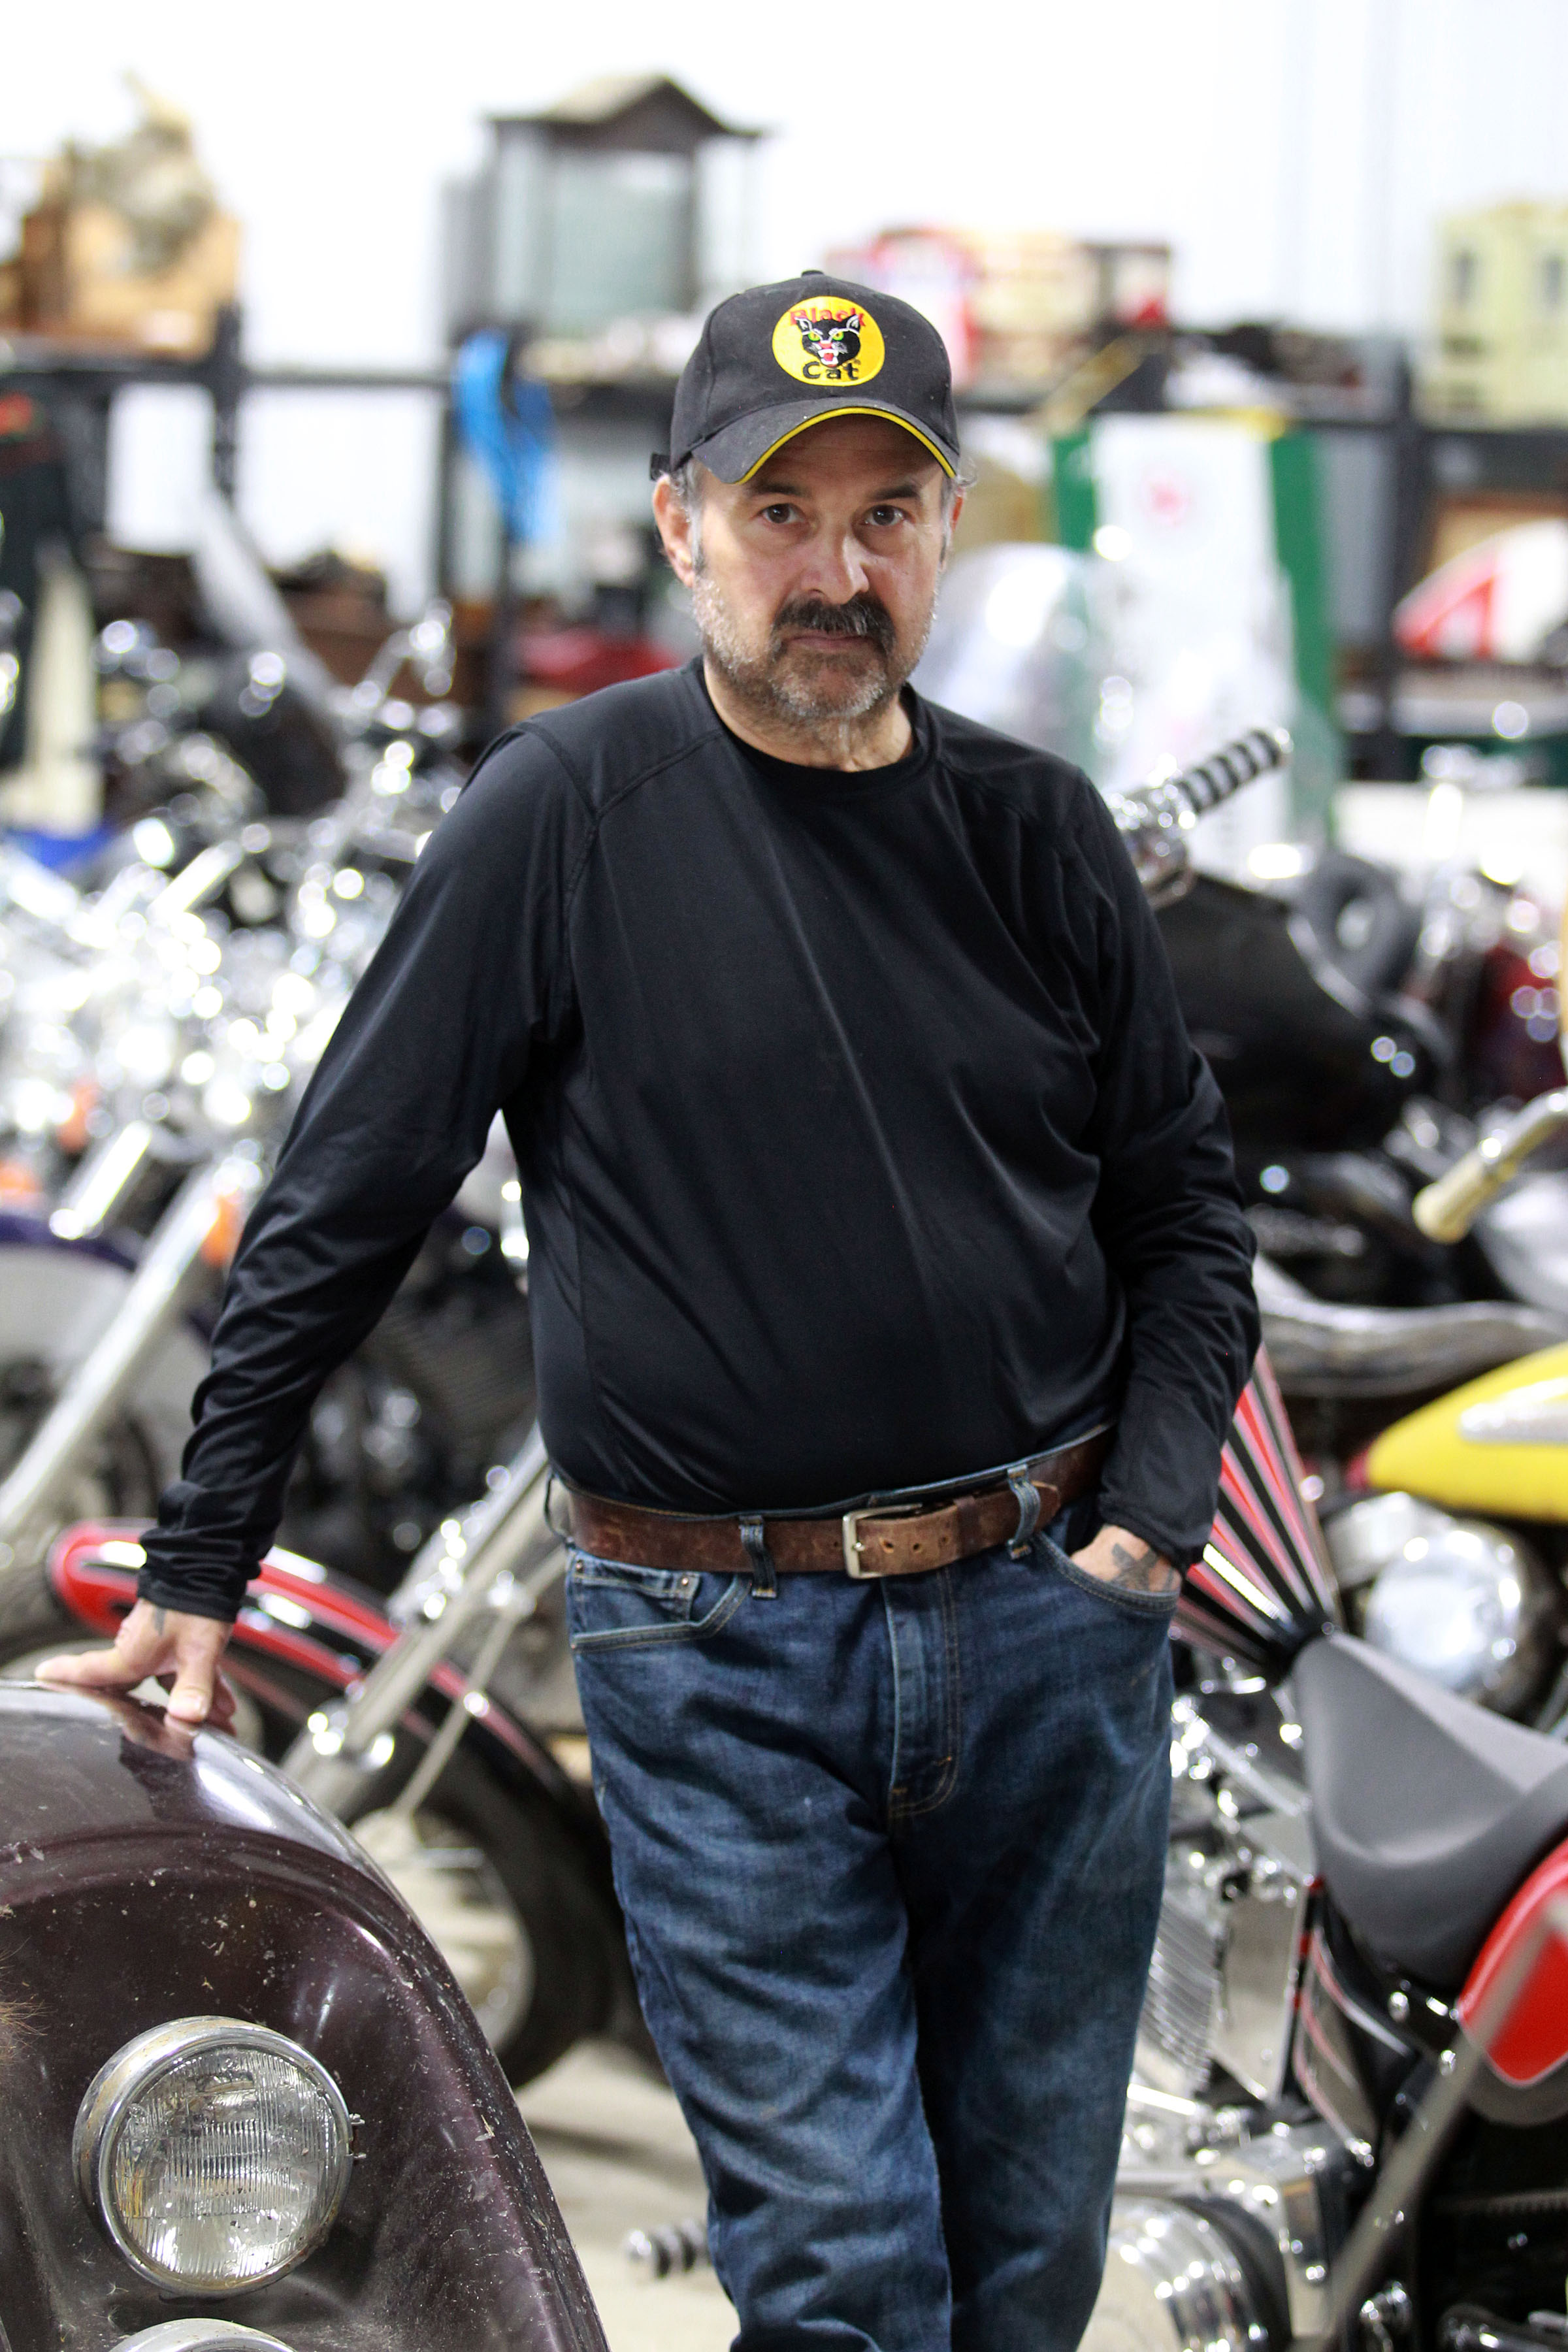 American Pickers fans continue to ask for Frank Fritz even though he was fired from the show